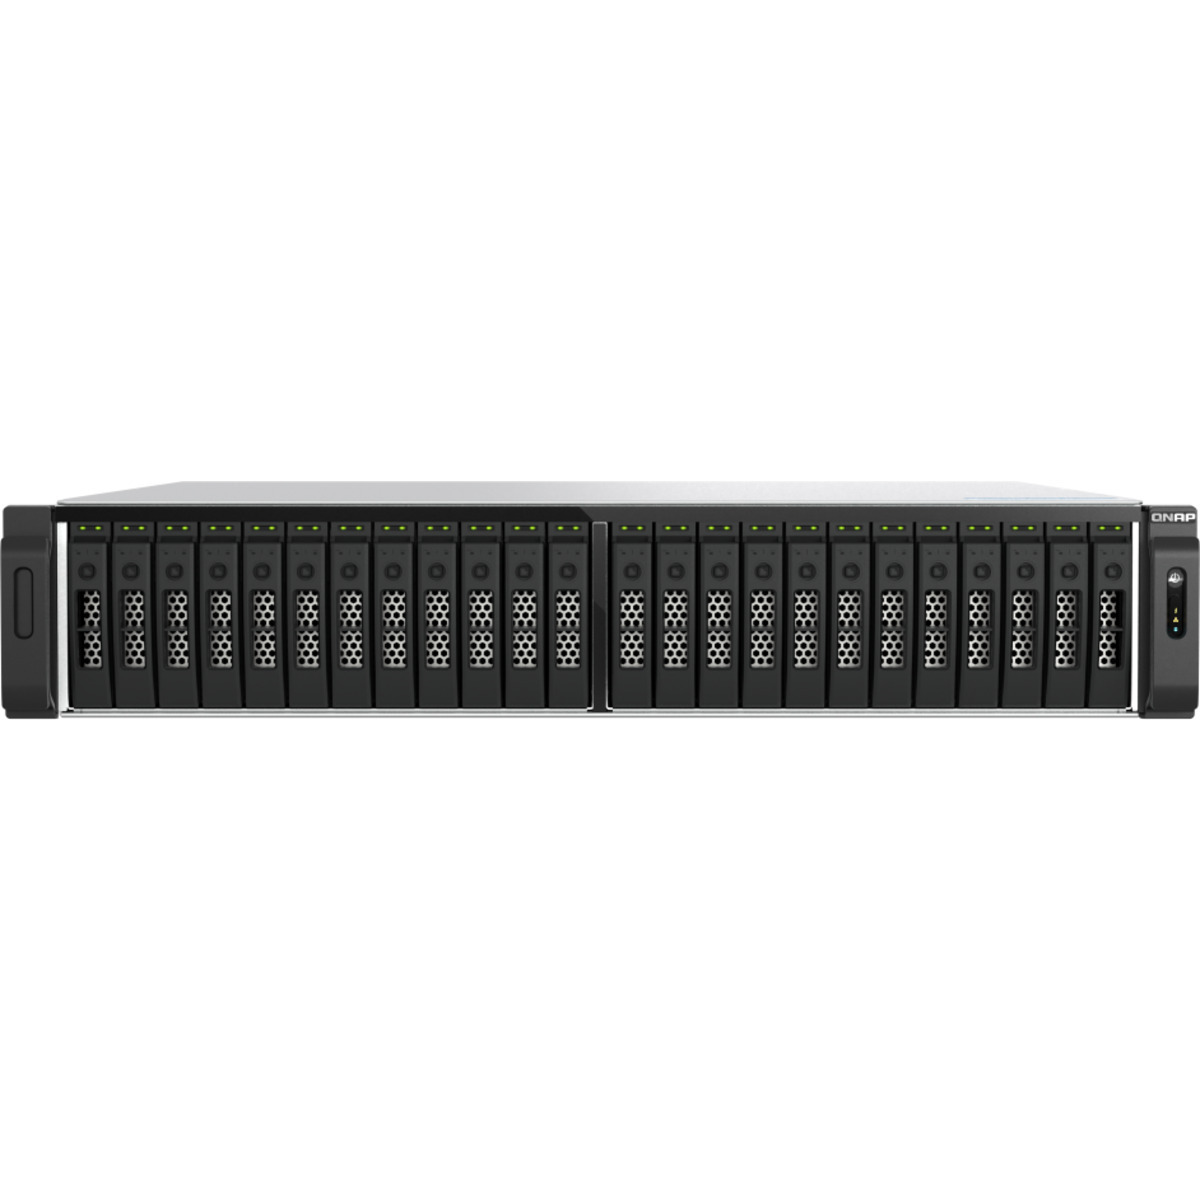 QNAP TS-h3077AFU Ryzen 5 All-Flash ZFS 200tb 30-Bay RackMount Large Business / Enterprise NAS - Network Attached Storage Device 25x8tb Samsung 870 QVO MZ-77Q8T0 2.5 560/530MB/s SATA 6Gb/s SSD CONSUMER Class Drives Installed - Burn-In Tested TS-h3077AFU Ryzen 5 All-Flash ZFS